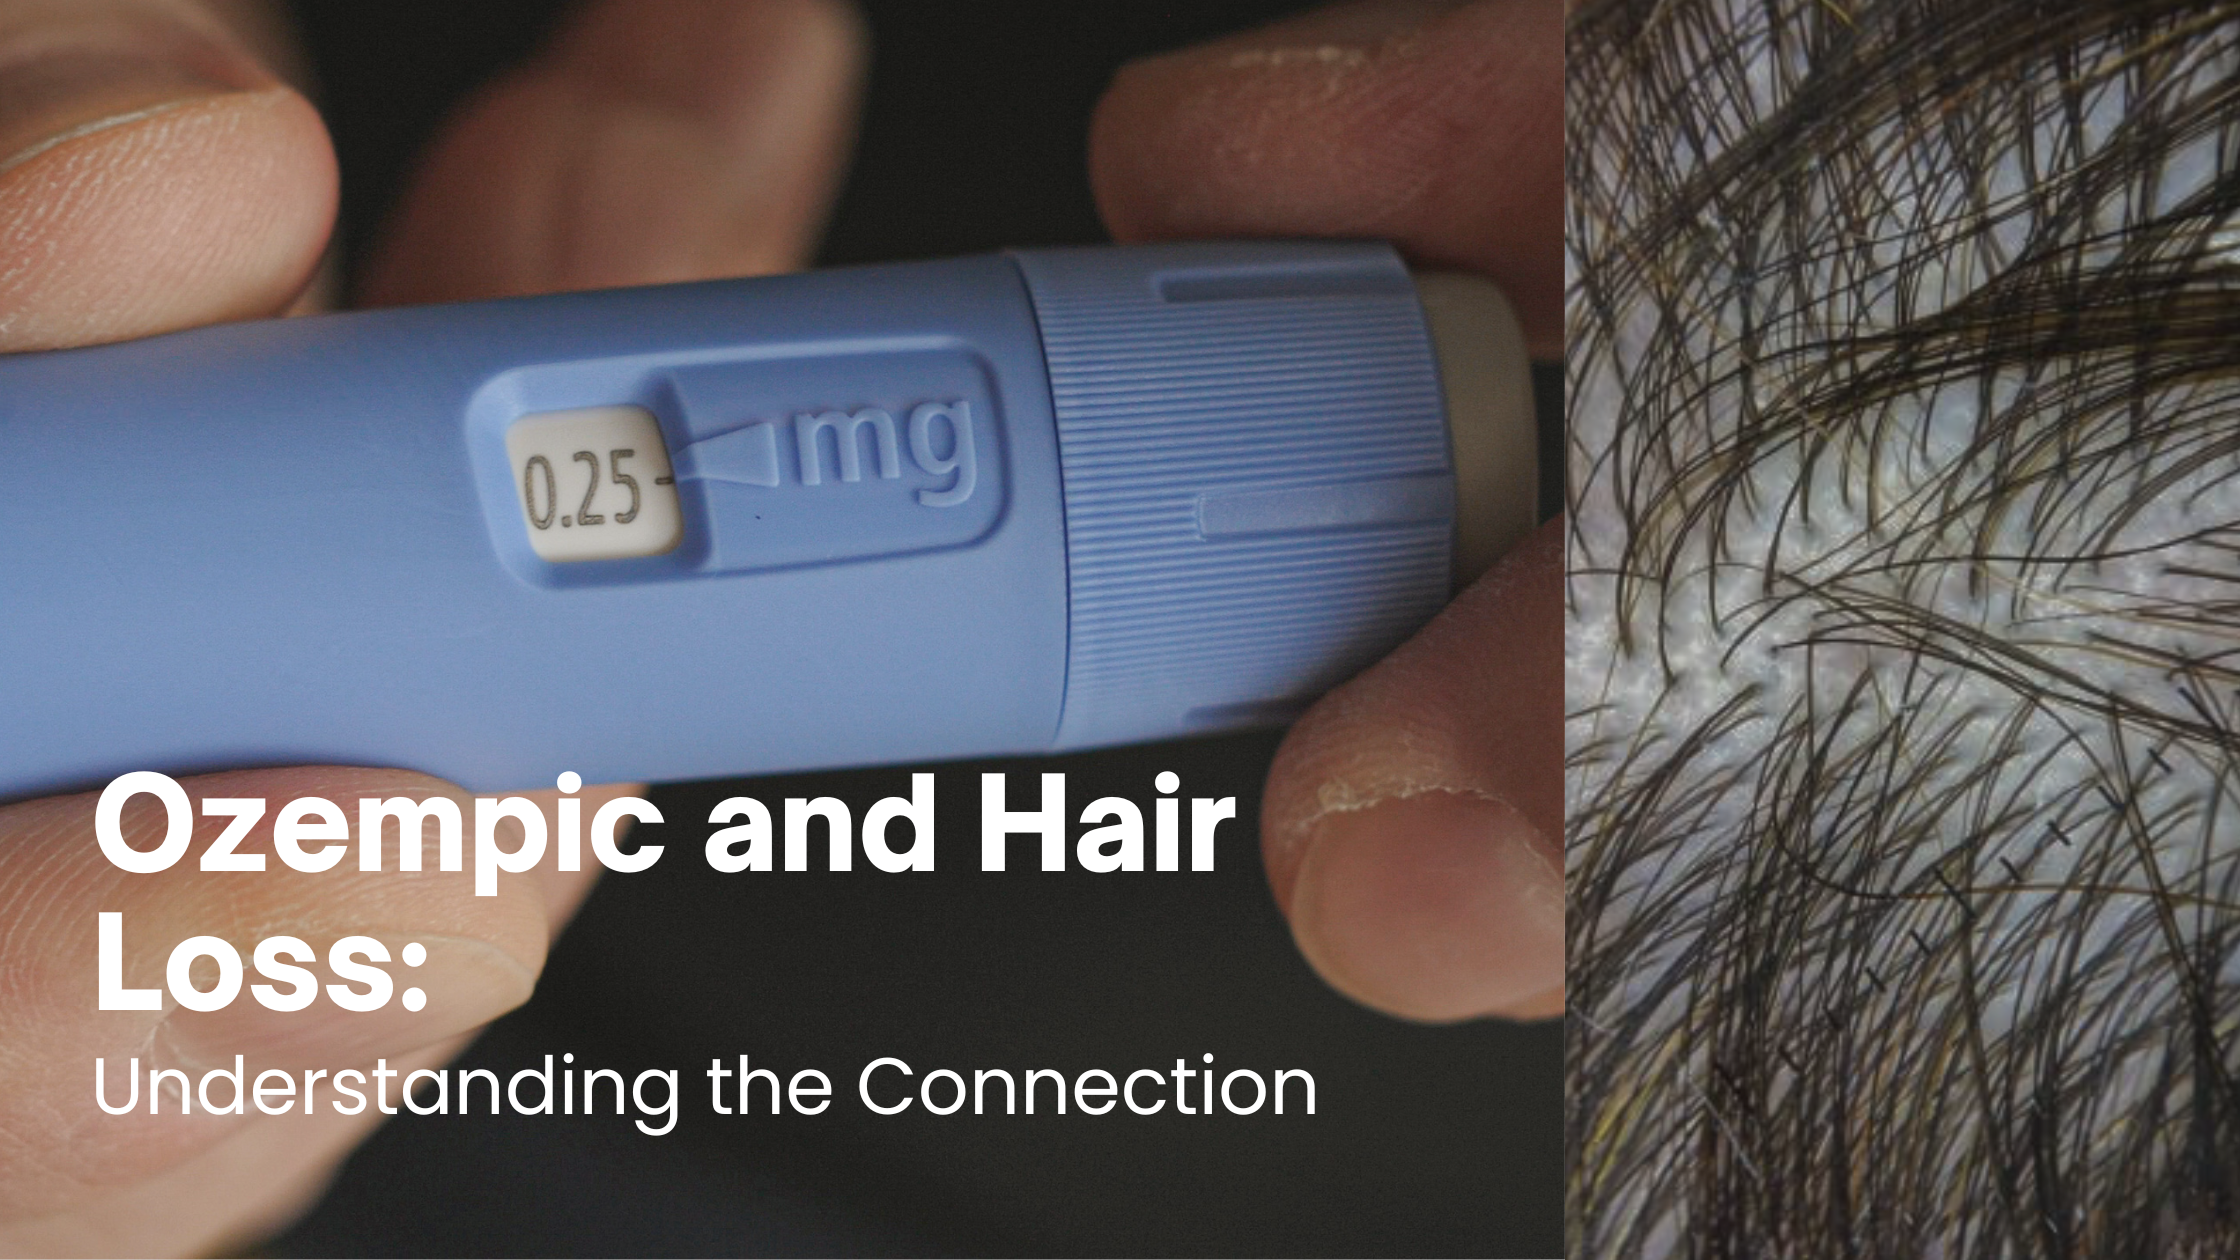 Ozempic and Hair Loss: Understanding the Connection